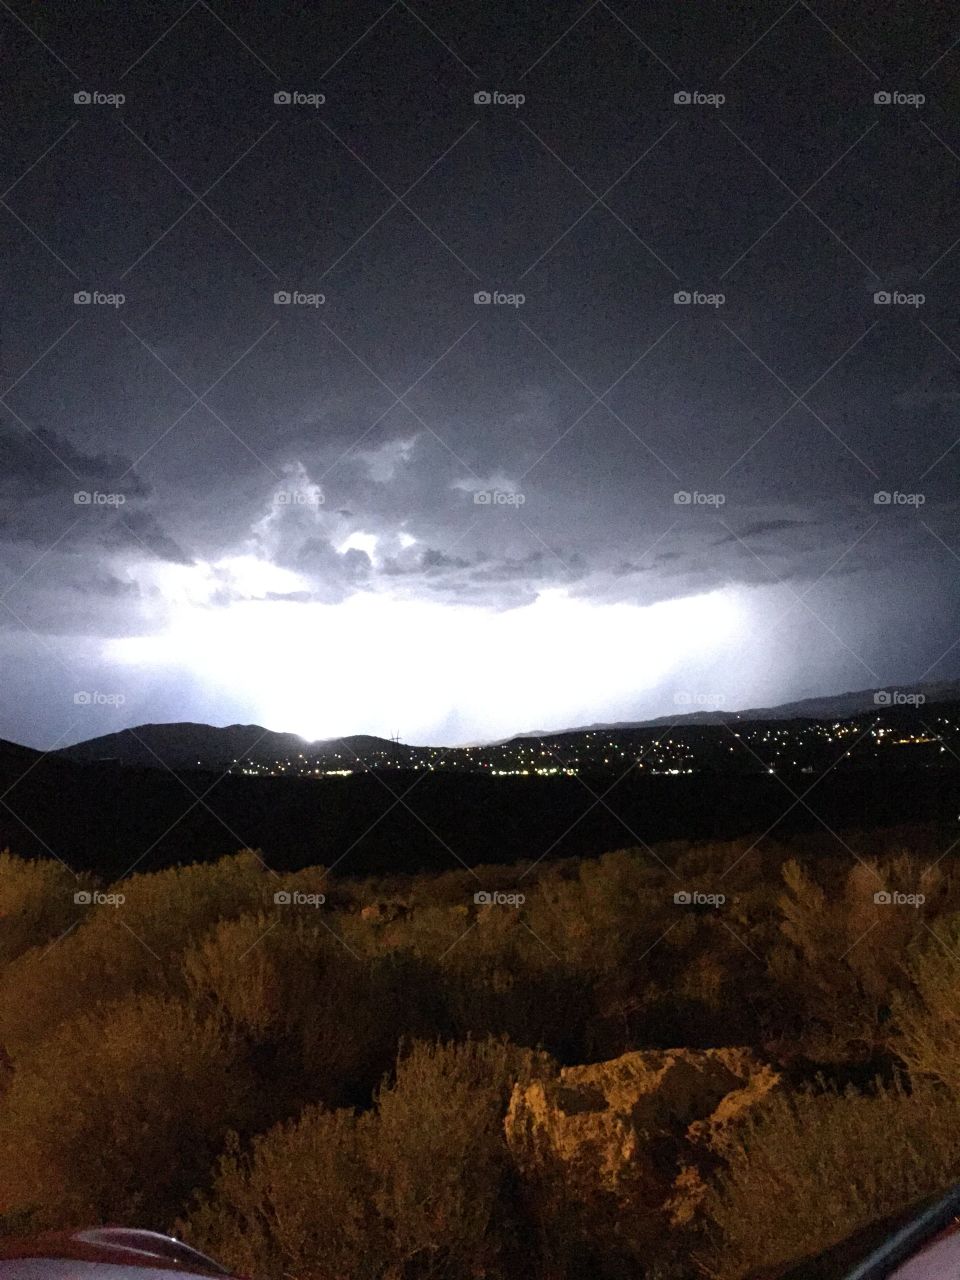 Thunder and lighting storm in Reno